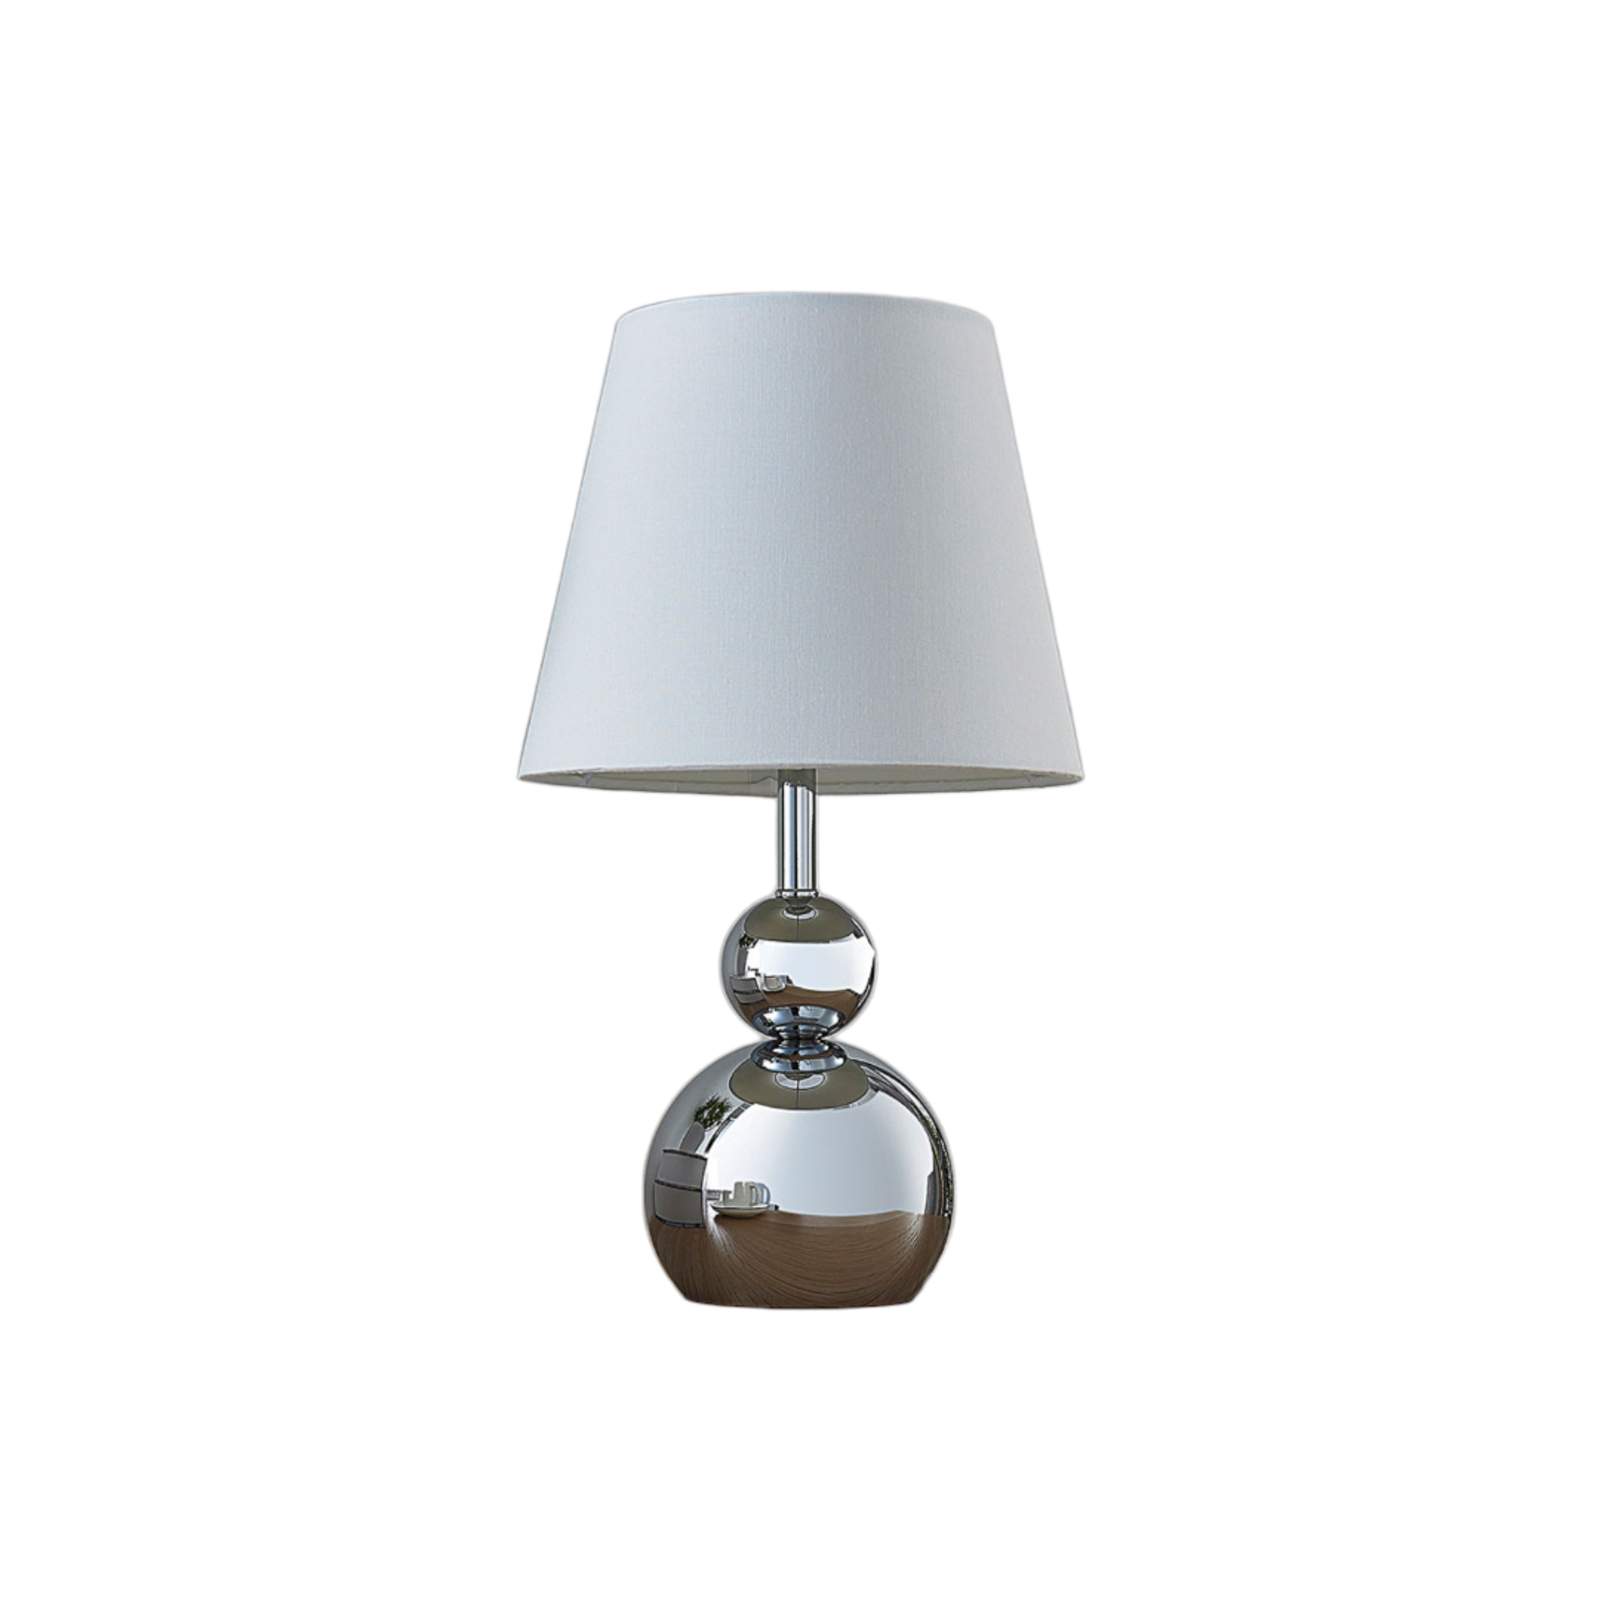 White fabric table lamp Andor with a chrome base